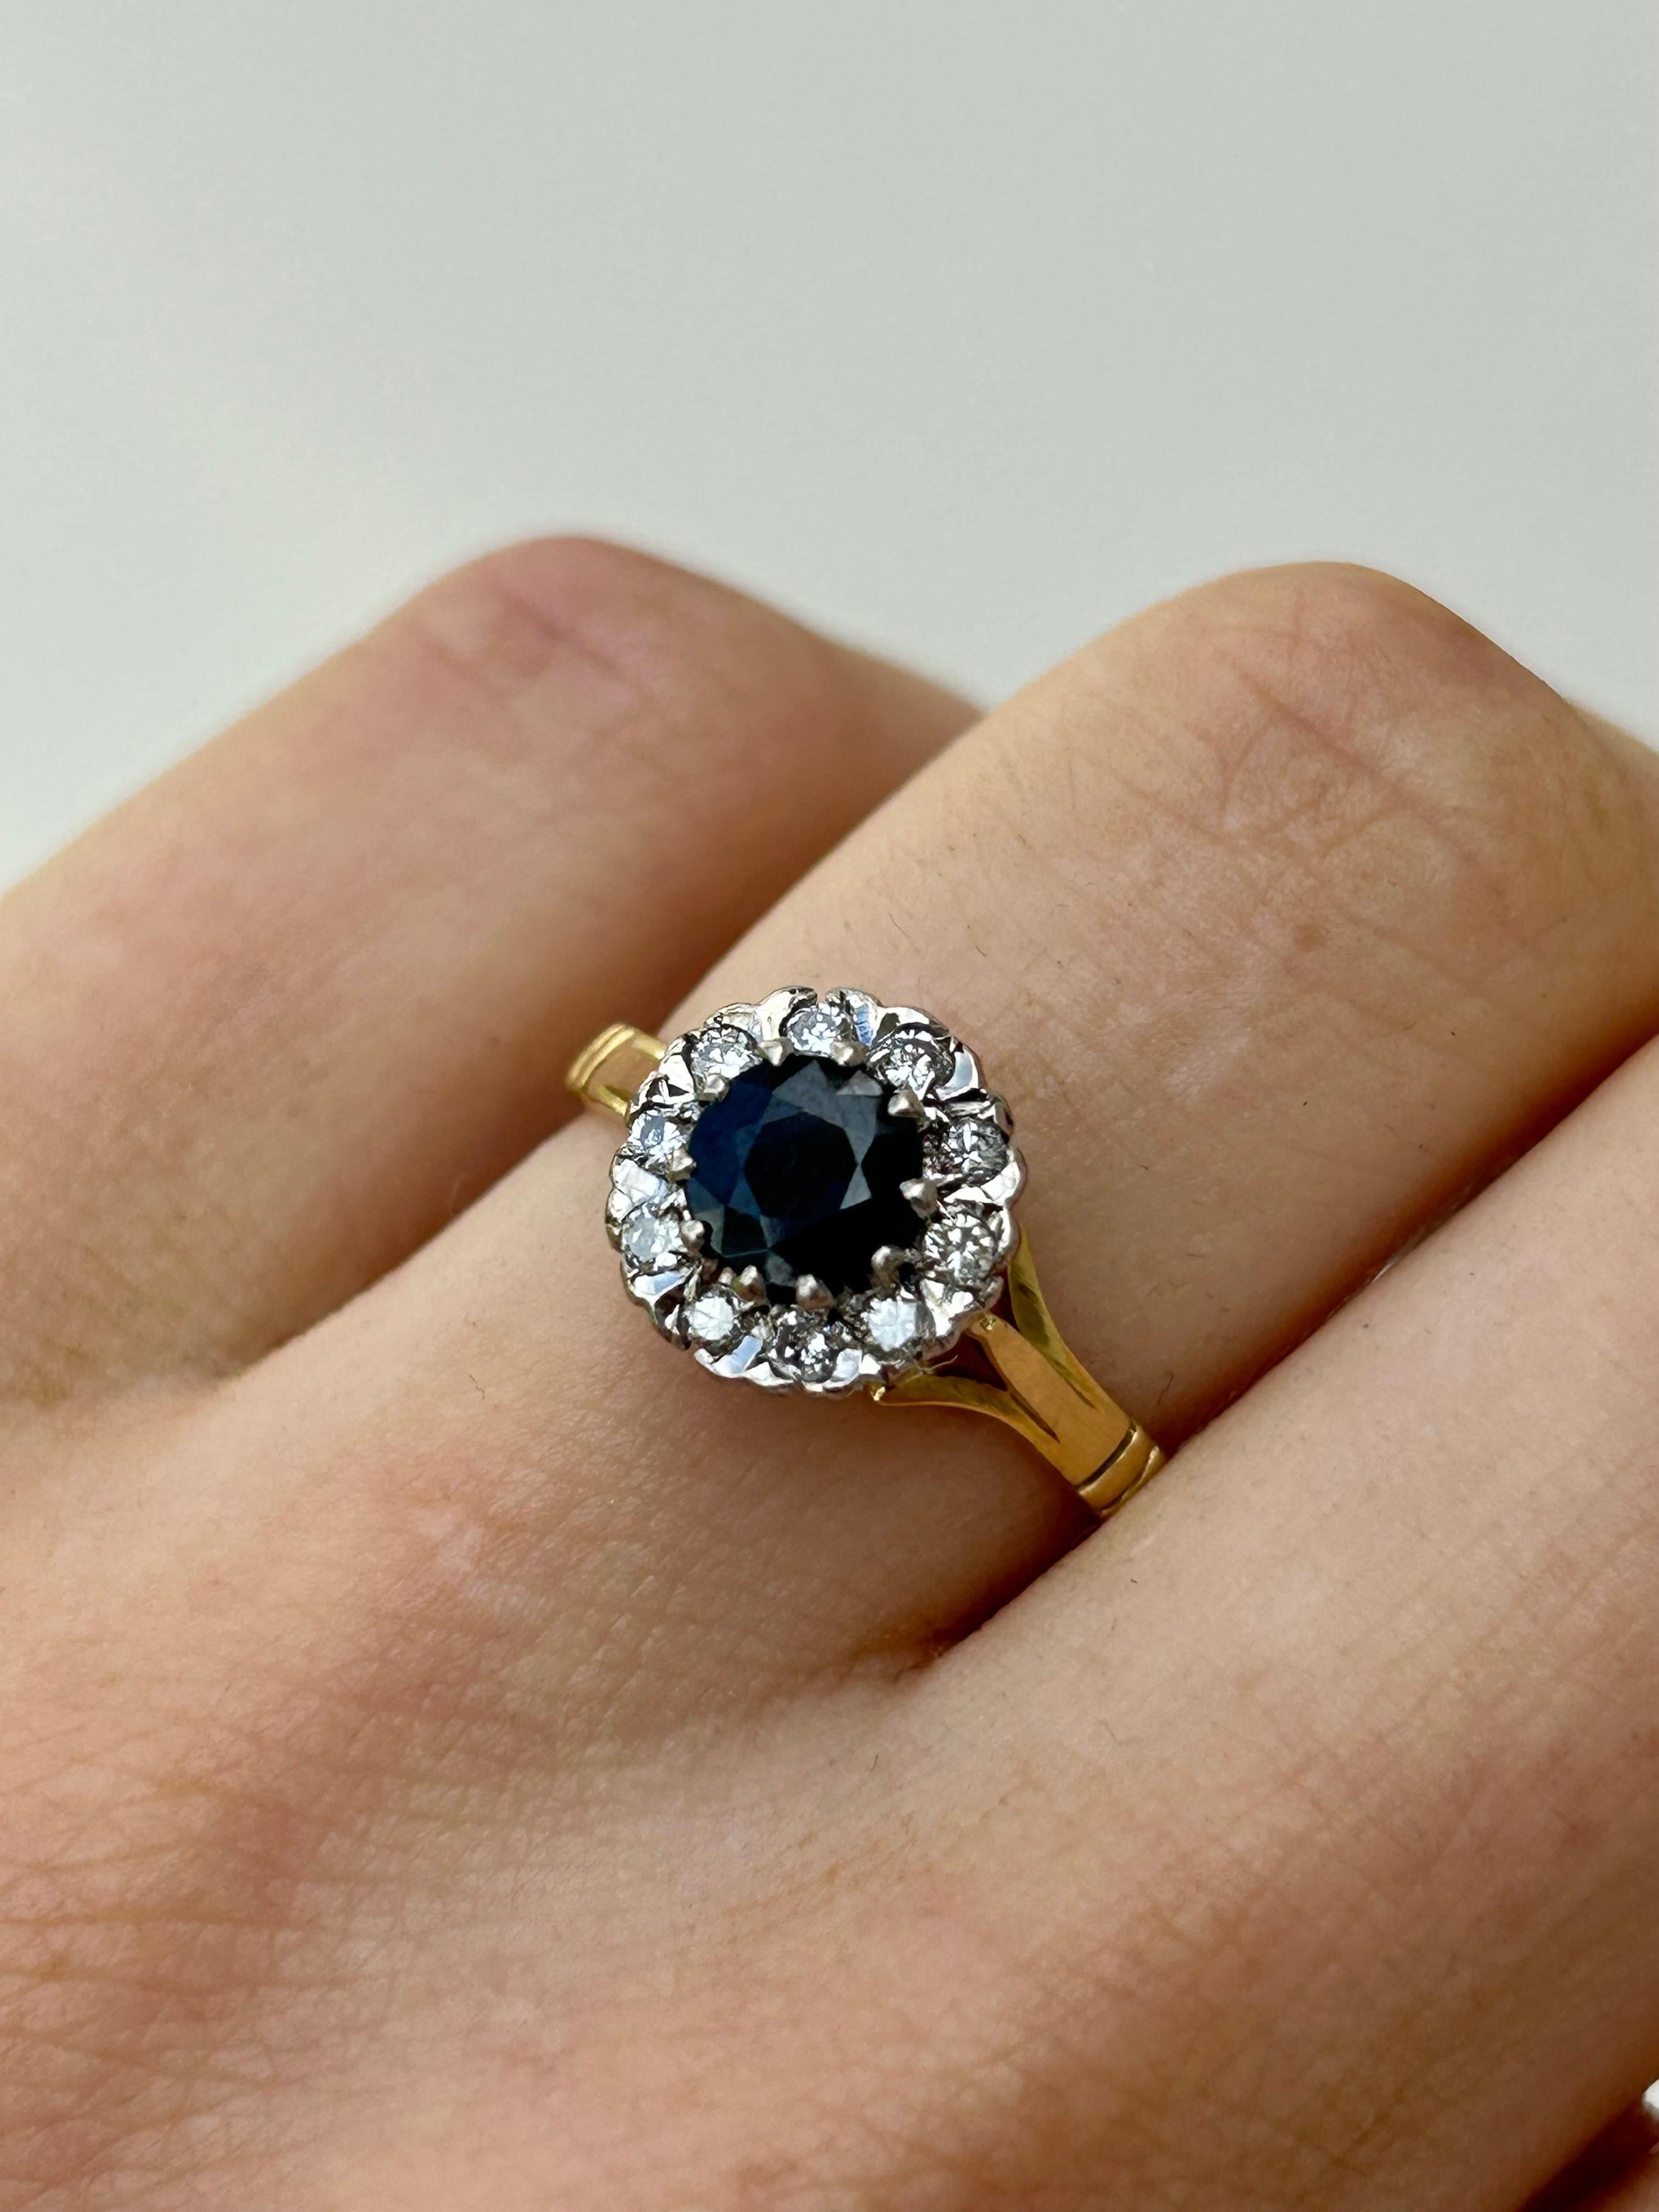 Vintage 18ct Yellow Gold Sapphire and Diamond Ring 

gorgeous sapphire stone with diamonds surrounding, truly excellent! 

The item comes without the box in the photos but will be presented in an Howard’s Antique gift box
 
Measurements: weight